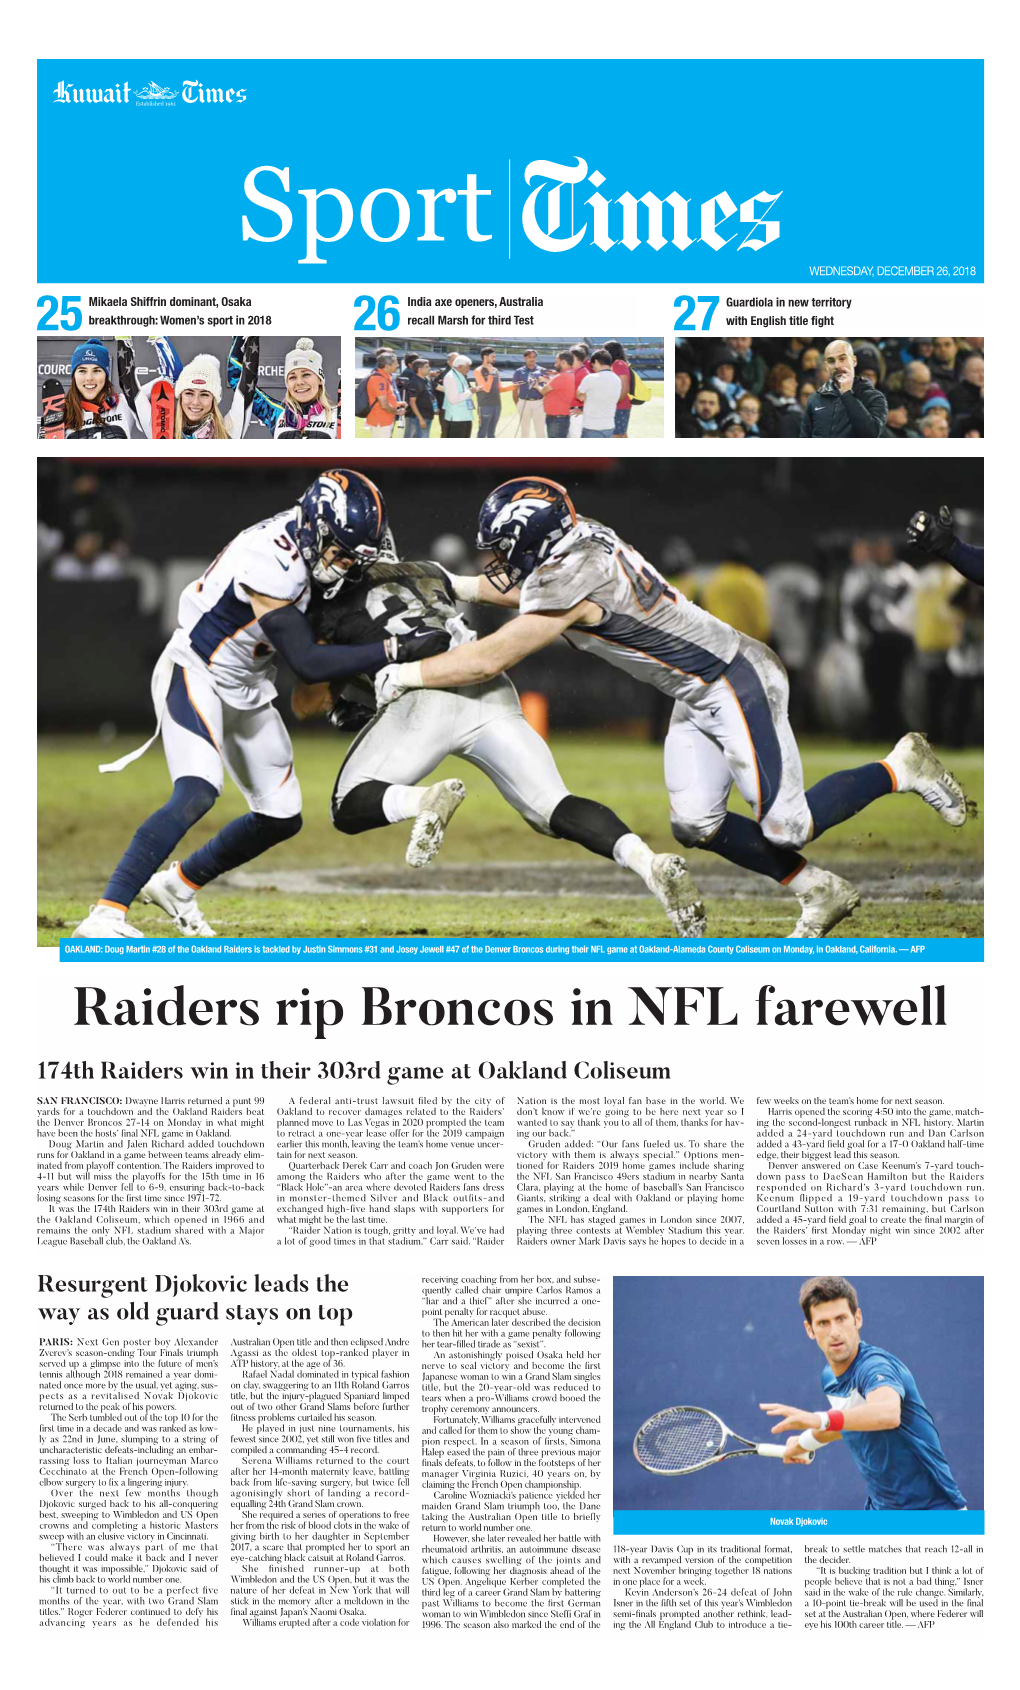 Raiders Rip Broncos in NFL Farewell 174Th Raiders Win in Their 303Rd Game at Oakland Coliseum